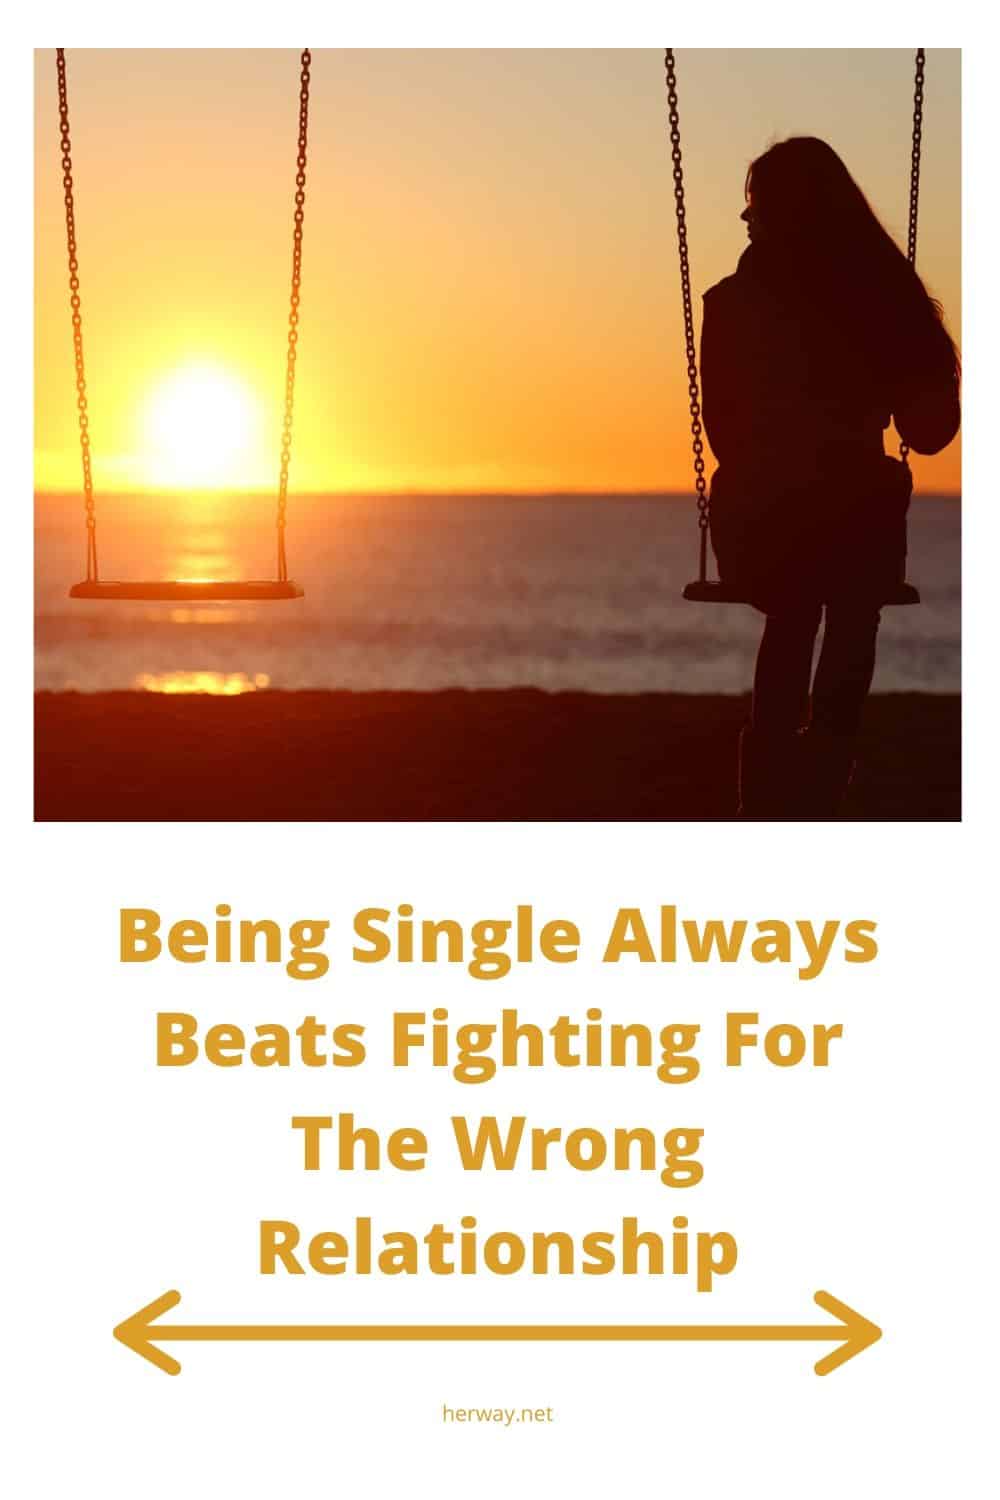 Being Single Always Beats Fighting For The Wrong Relationship